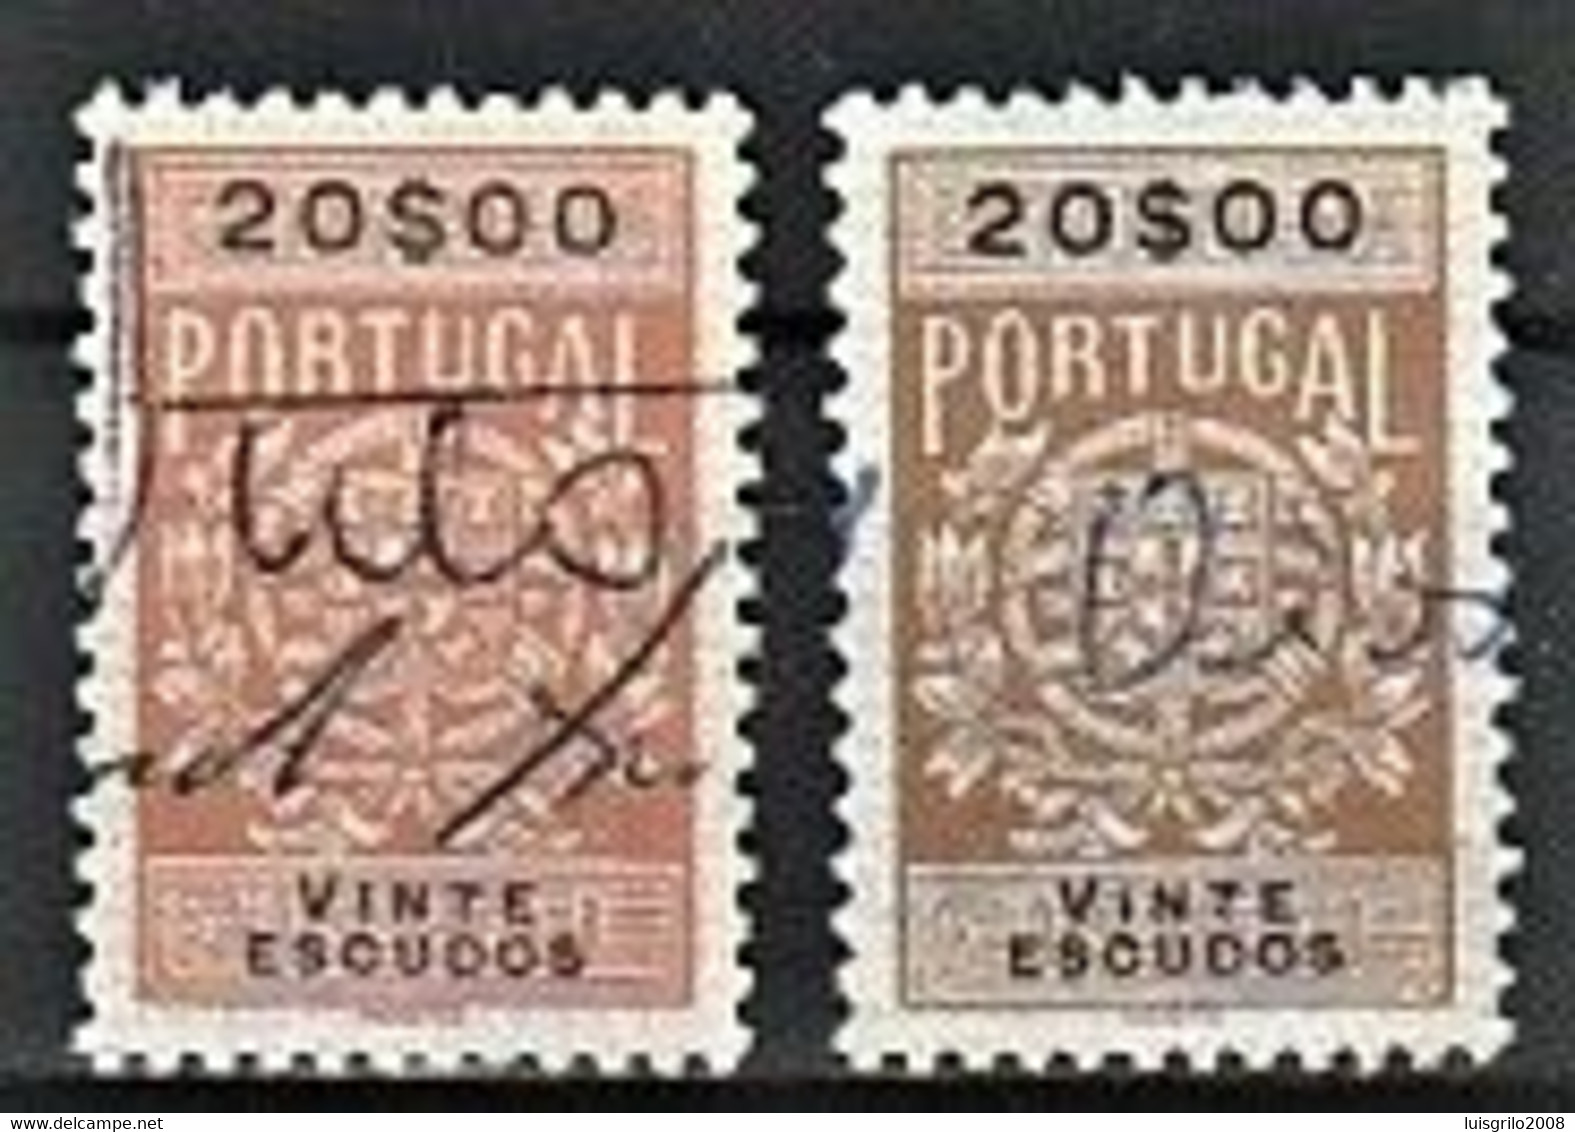 Fiscal/ Revenue, Portugal 1940 - Estampilha Fiscal -|- 20$00 - COLOR VARIANT - Is The Stamp Of The Right - Usati